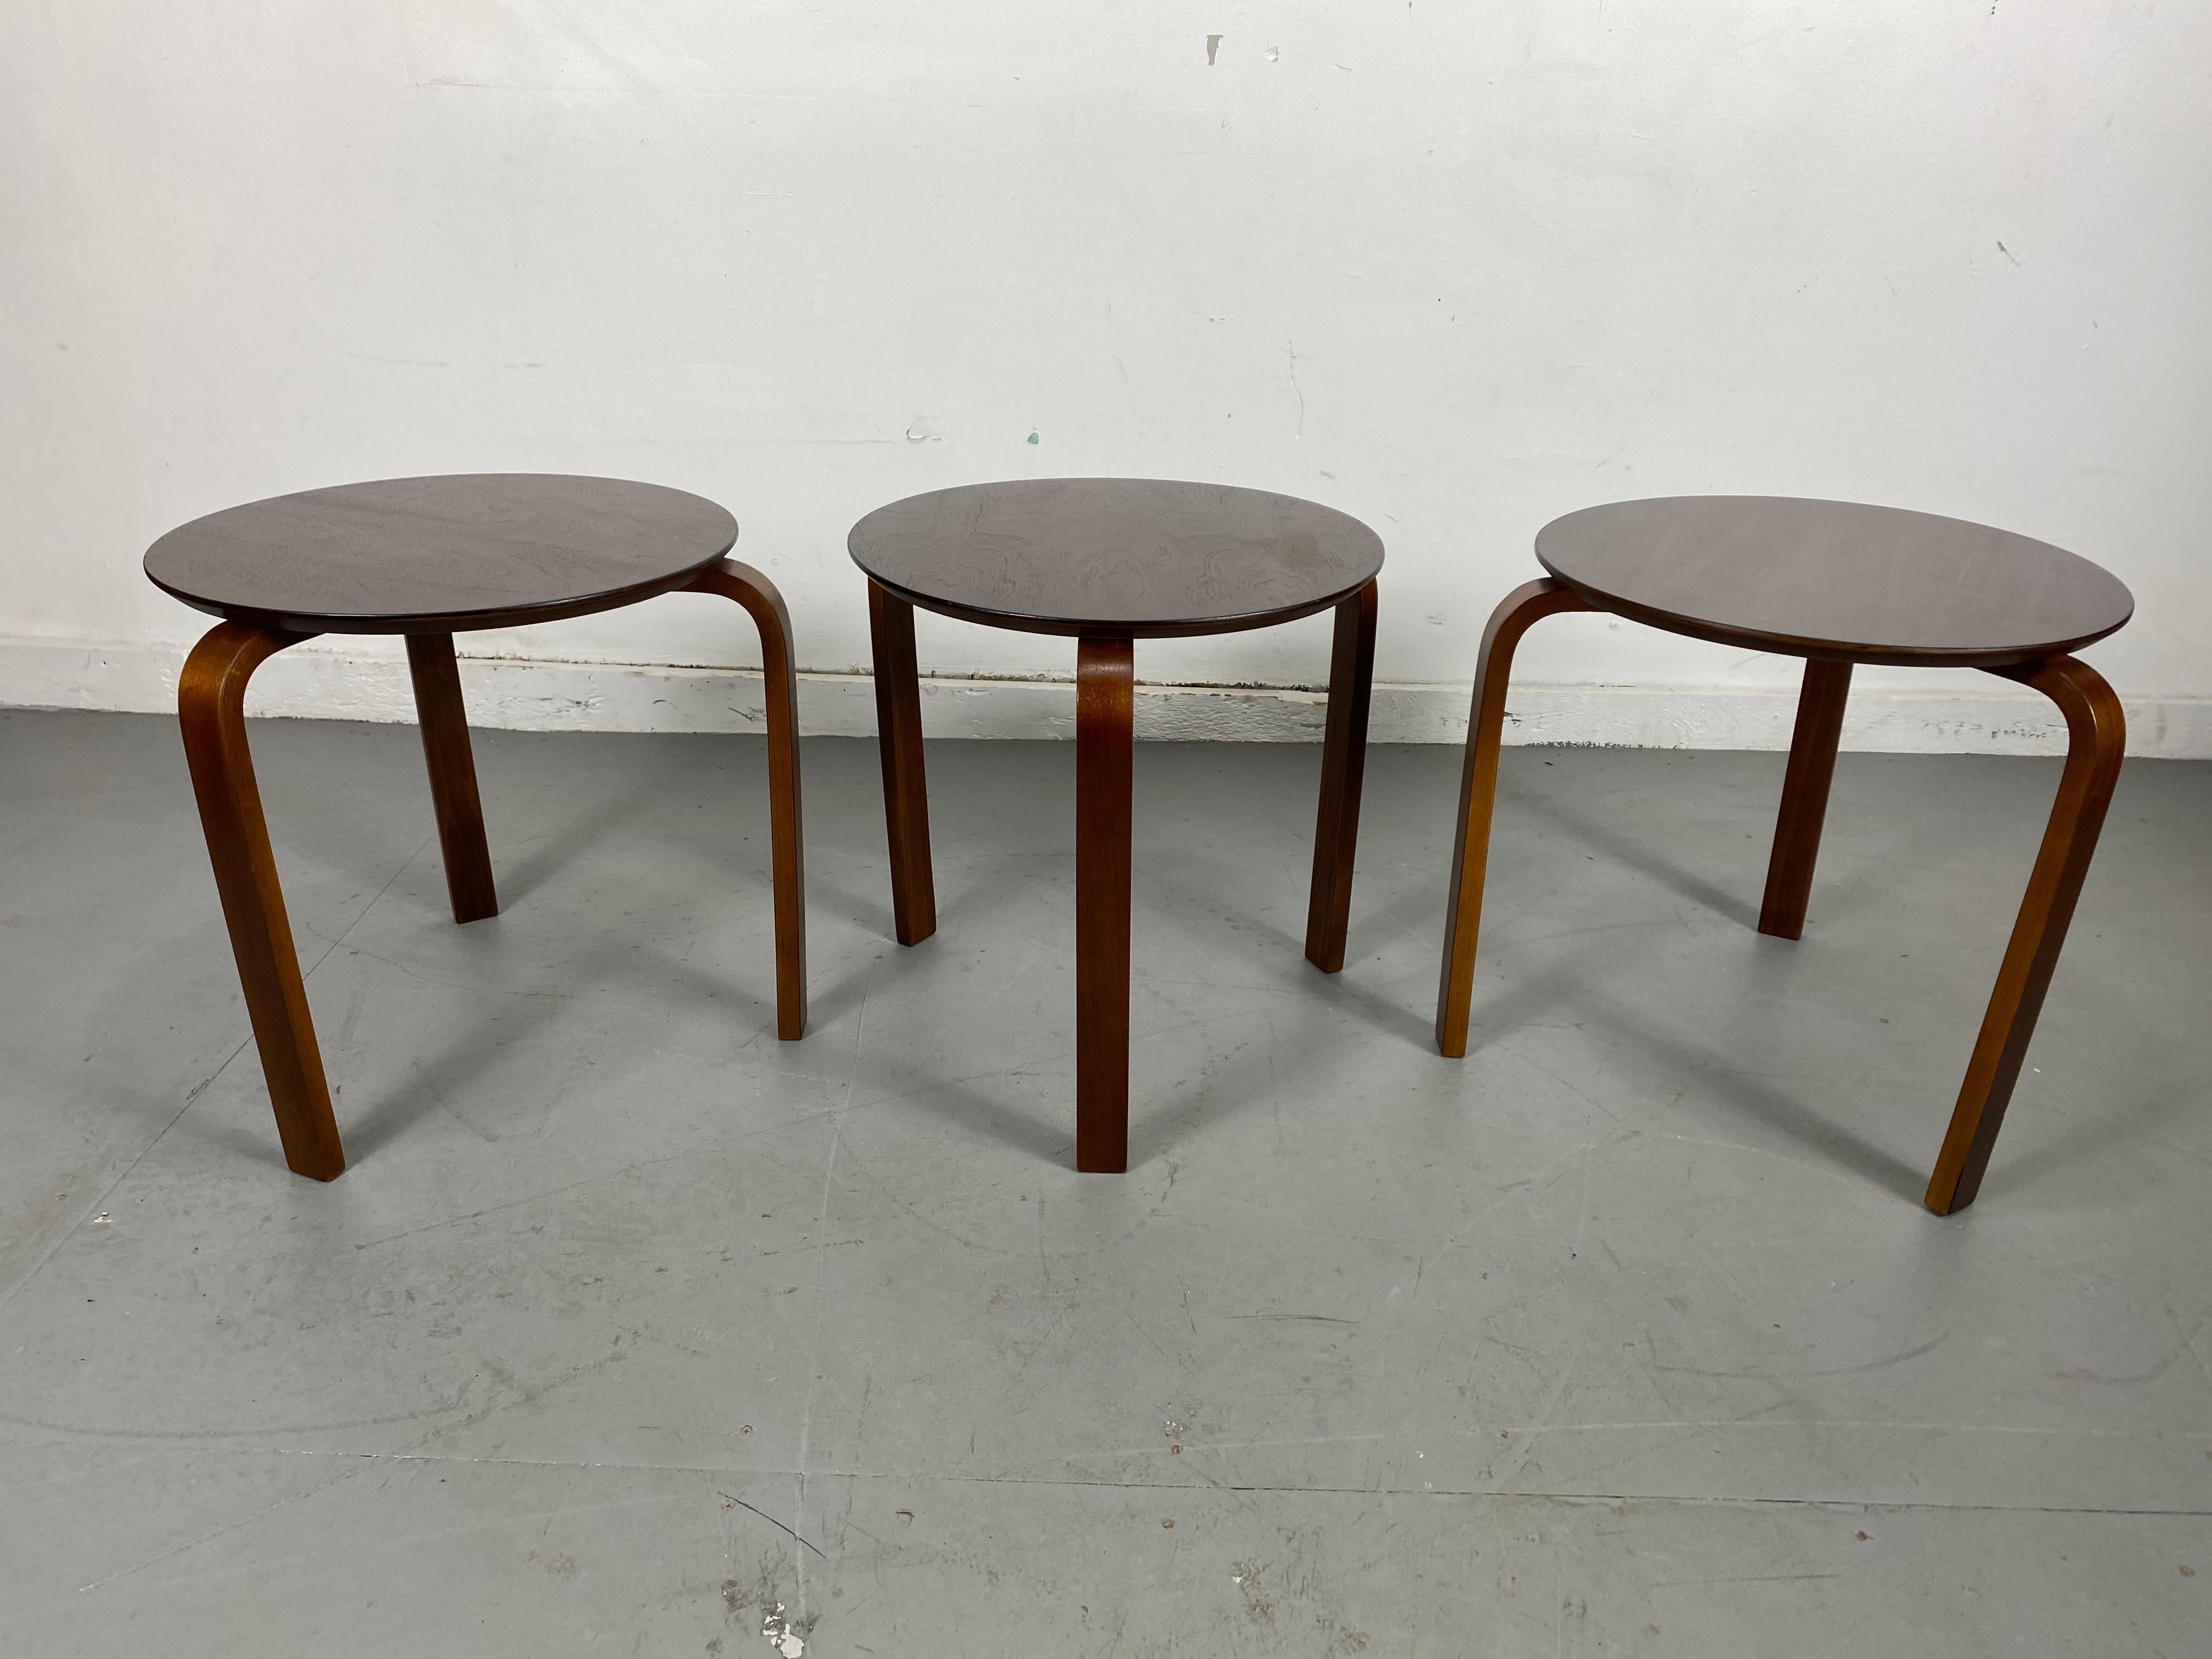 Set of 3, Classic Bentwood Tables, Modernist, Made in Denmark In Good Condition For Sale In Buffalo, NY